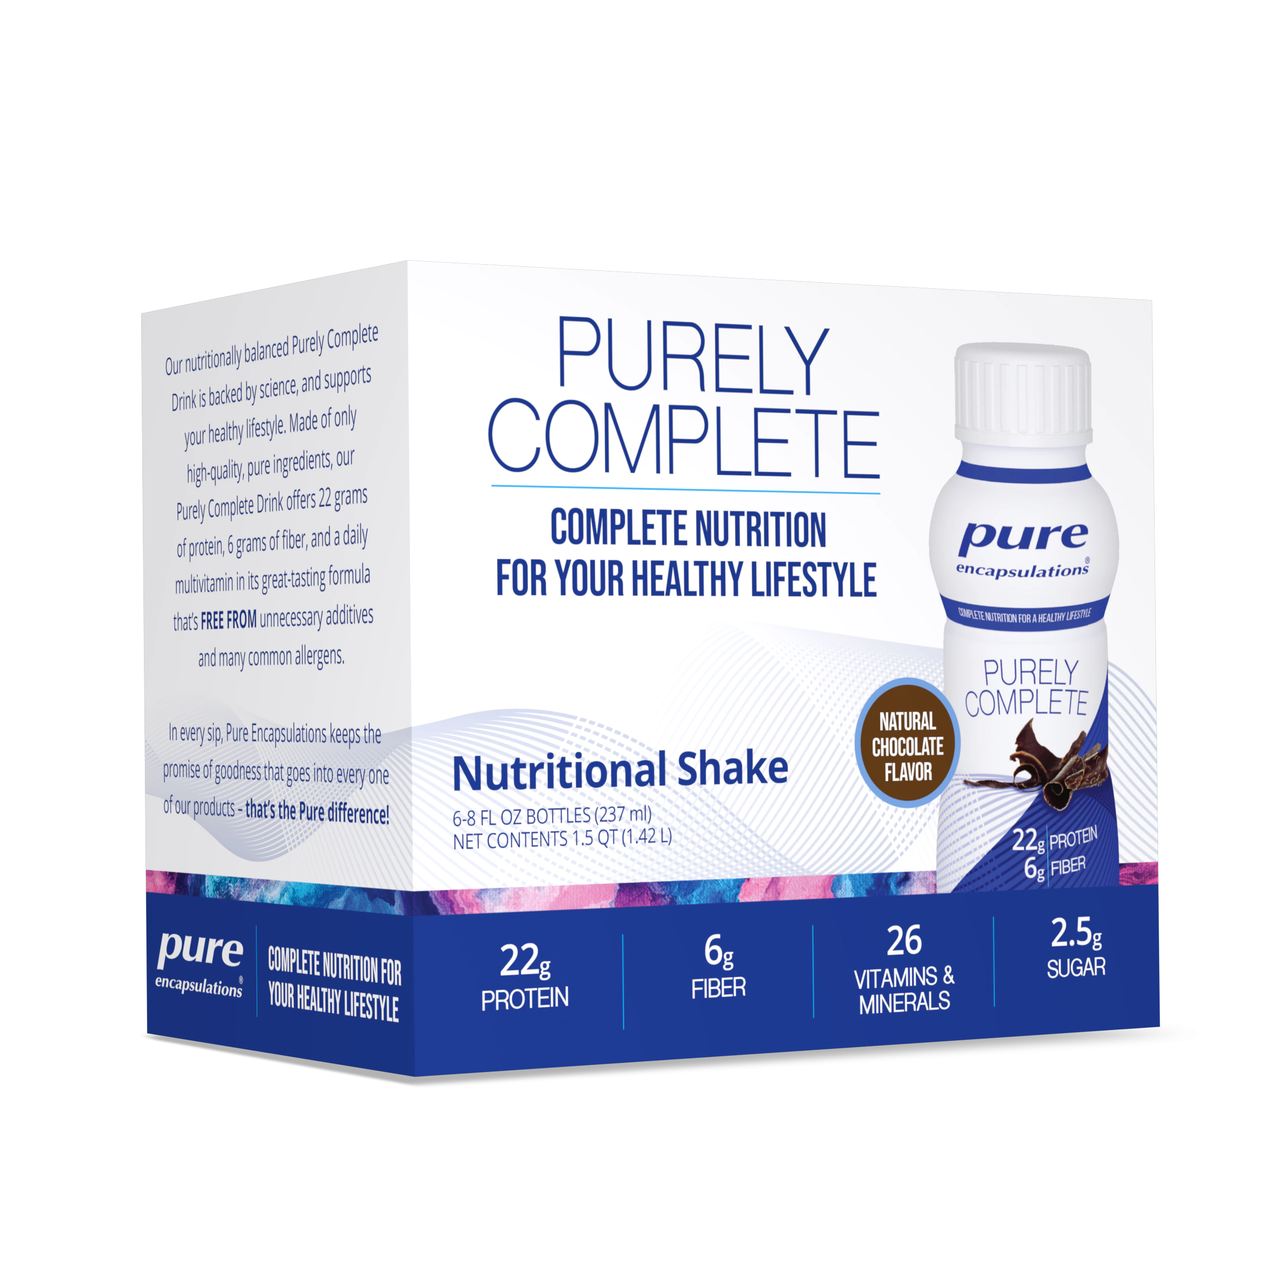 PurelyCompleteChocolate6pack